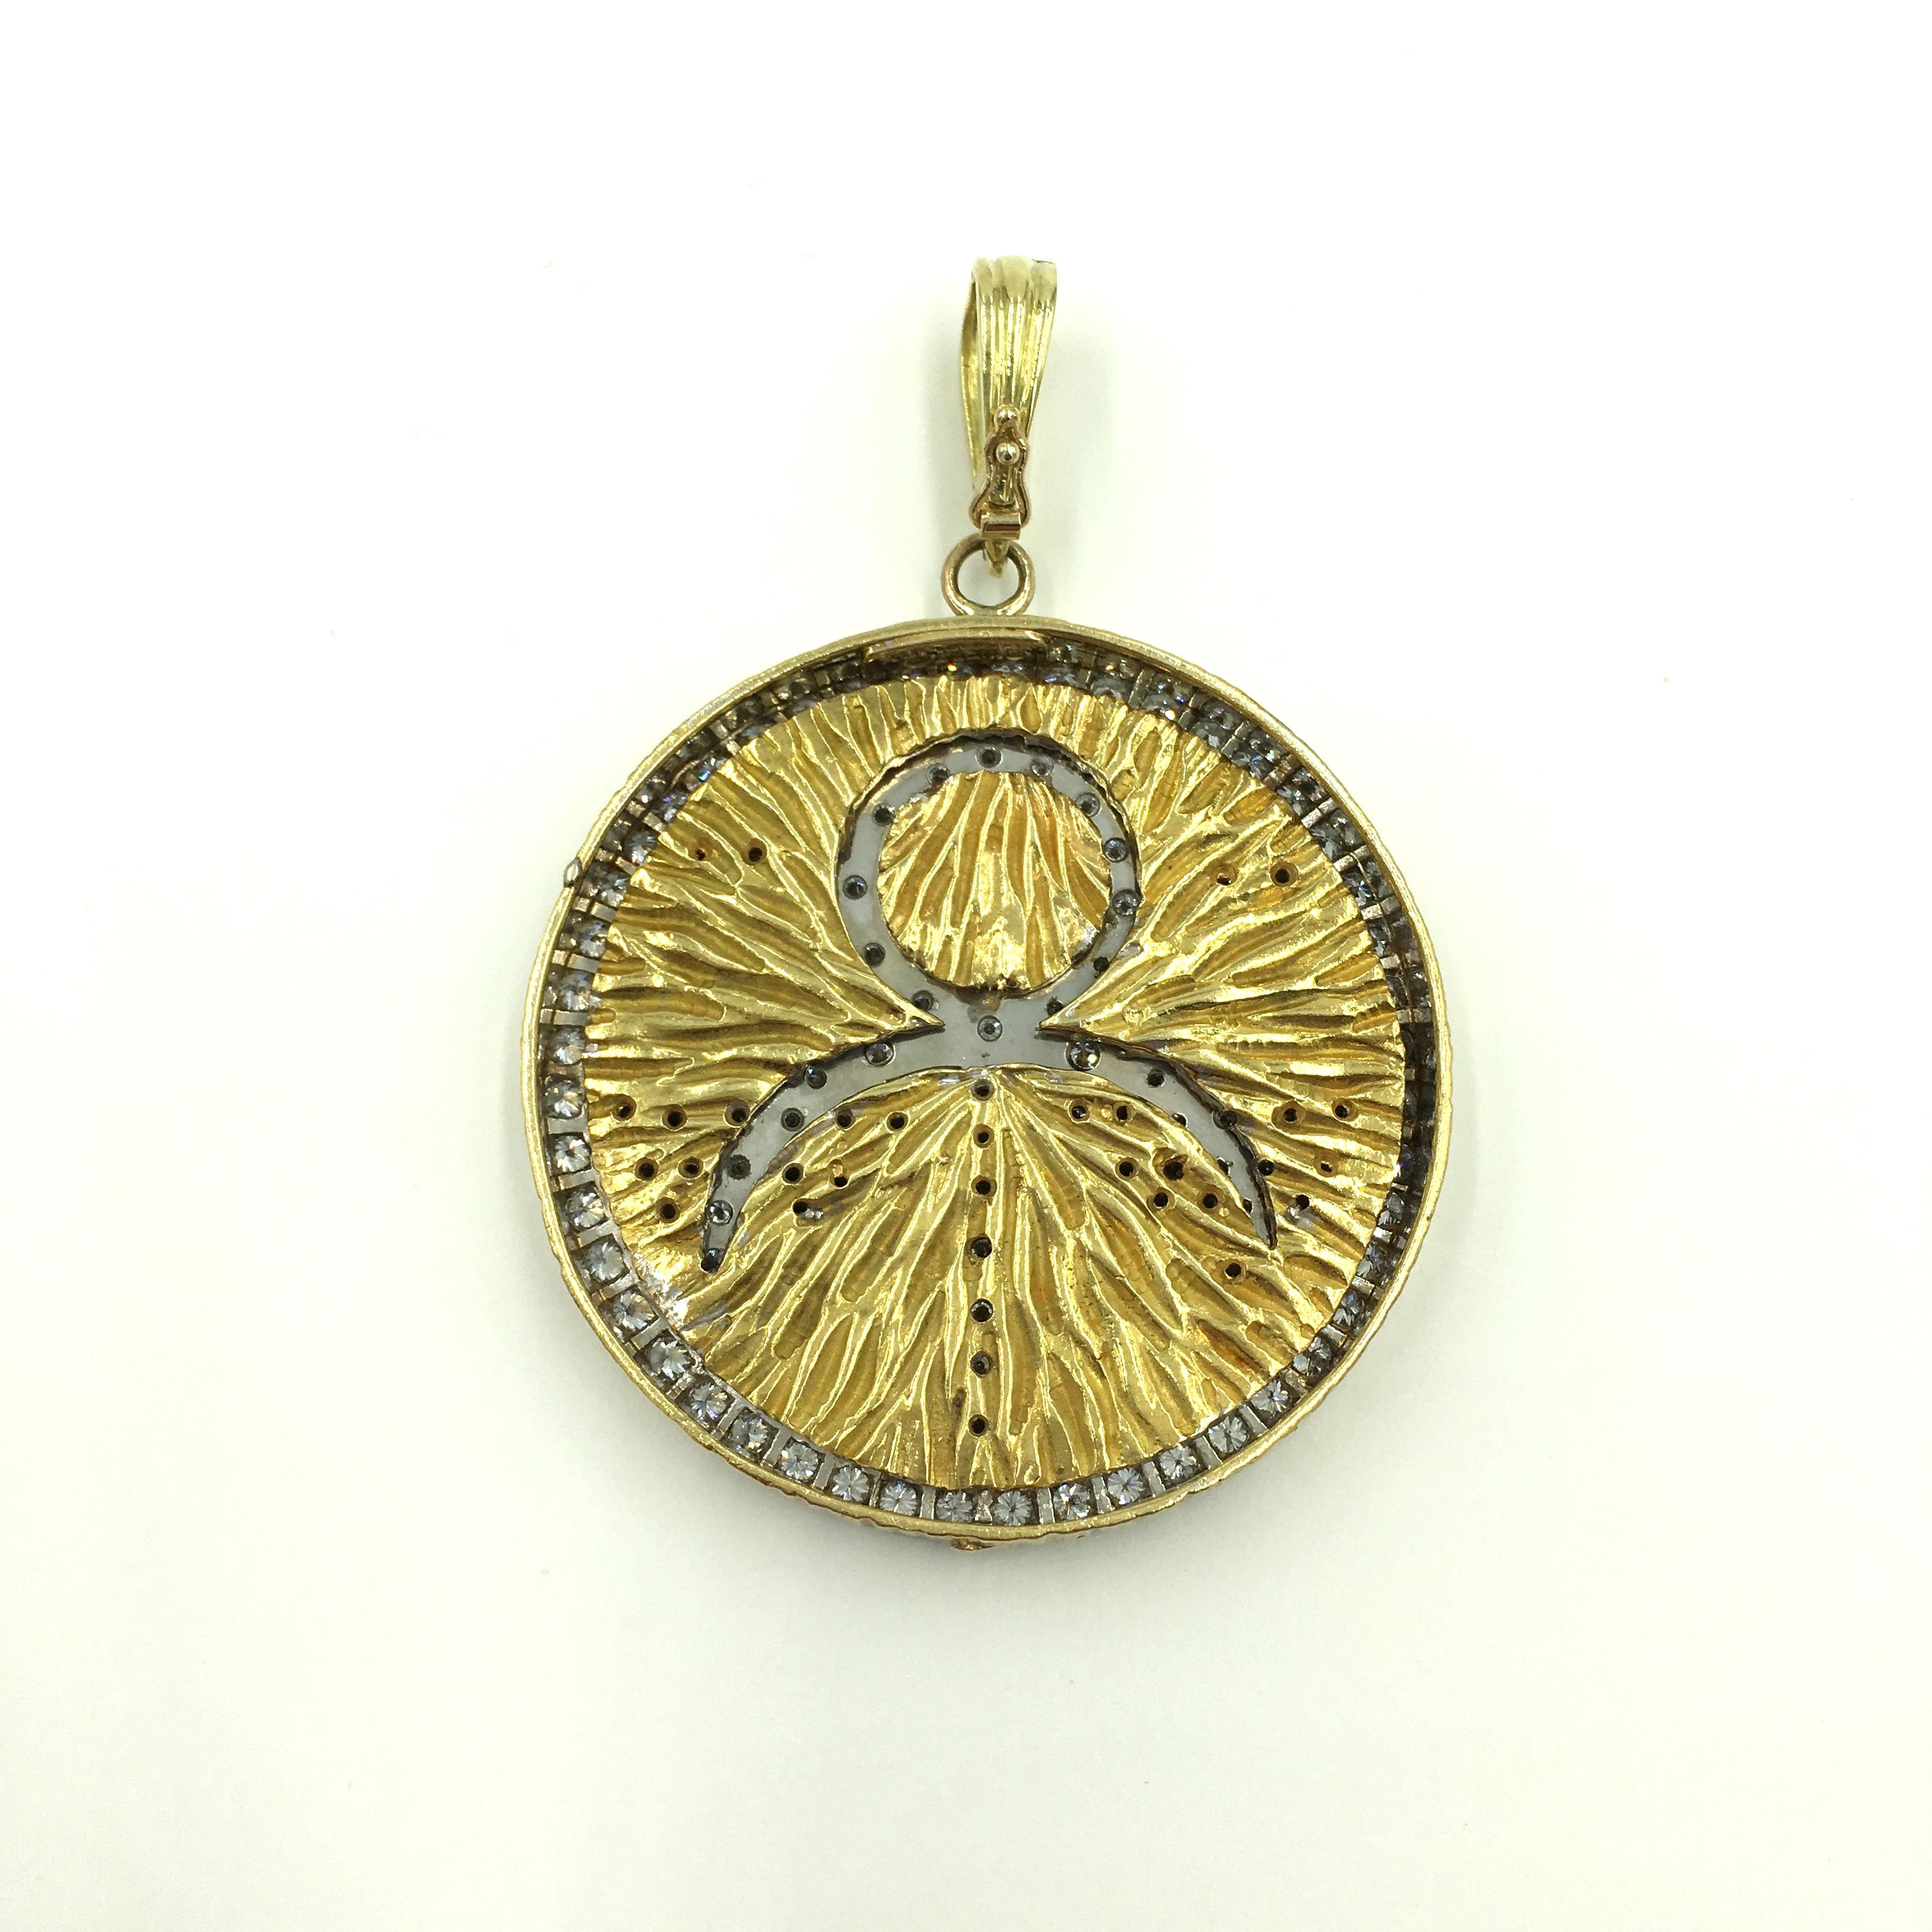 An 18 karat yellow gold, platinum and diamond pendant. Webb. Circa 1970.  Designed as a textured gold disc, depicting the zodiac sign for Libra, enhanced by pave set diamonds, suspended from a fluted gold hinged bale. Diameter of pendant is